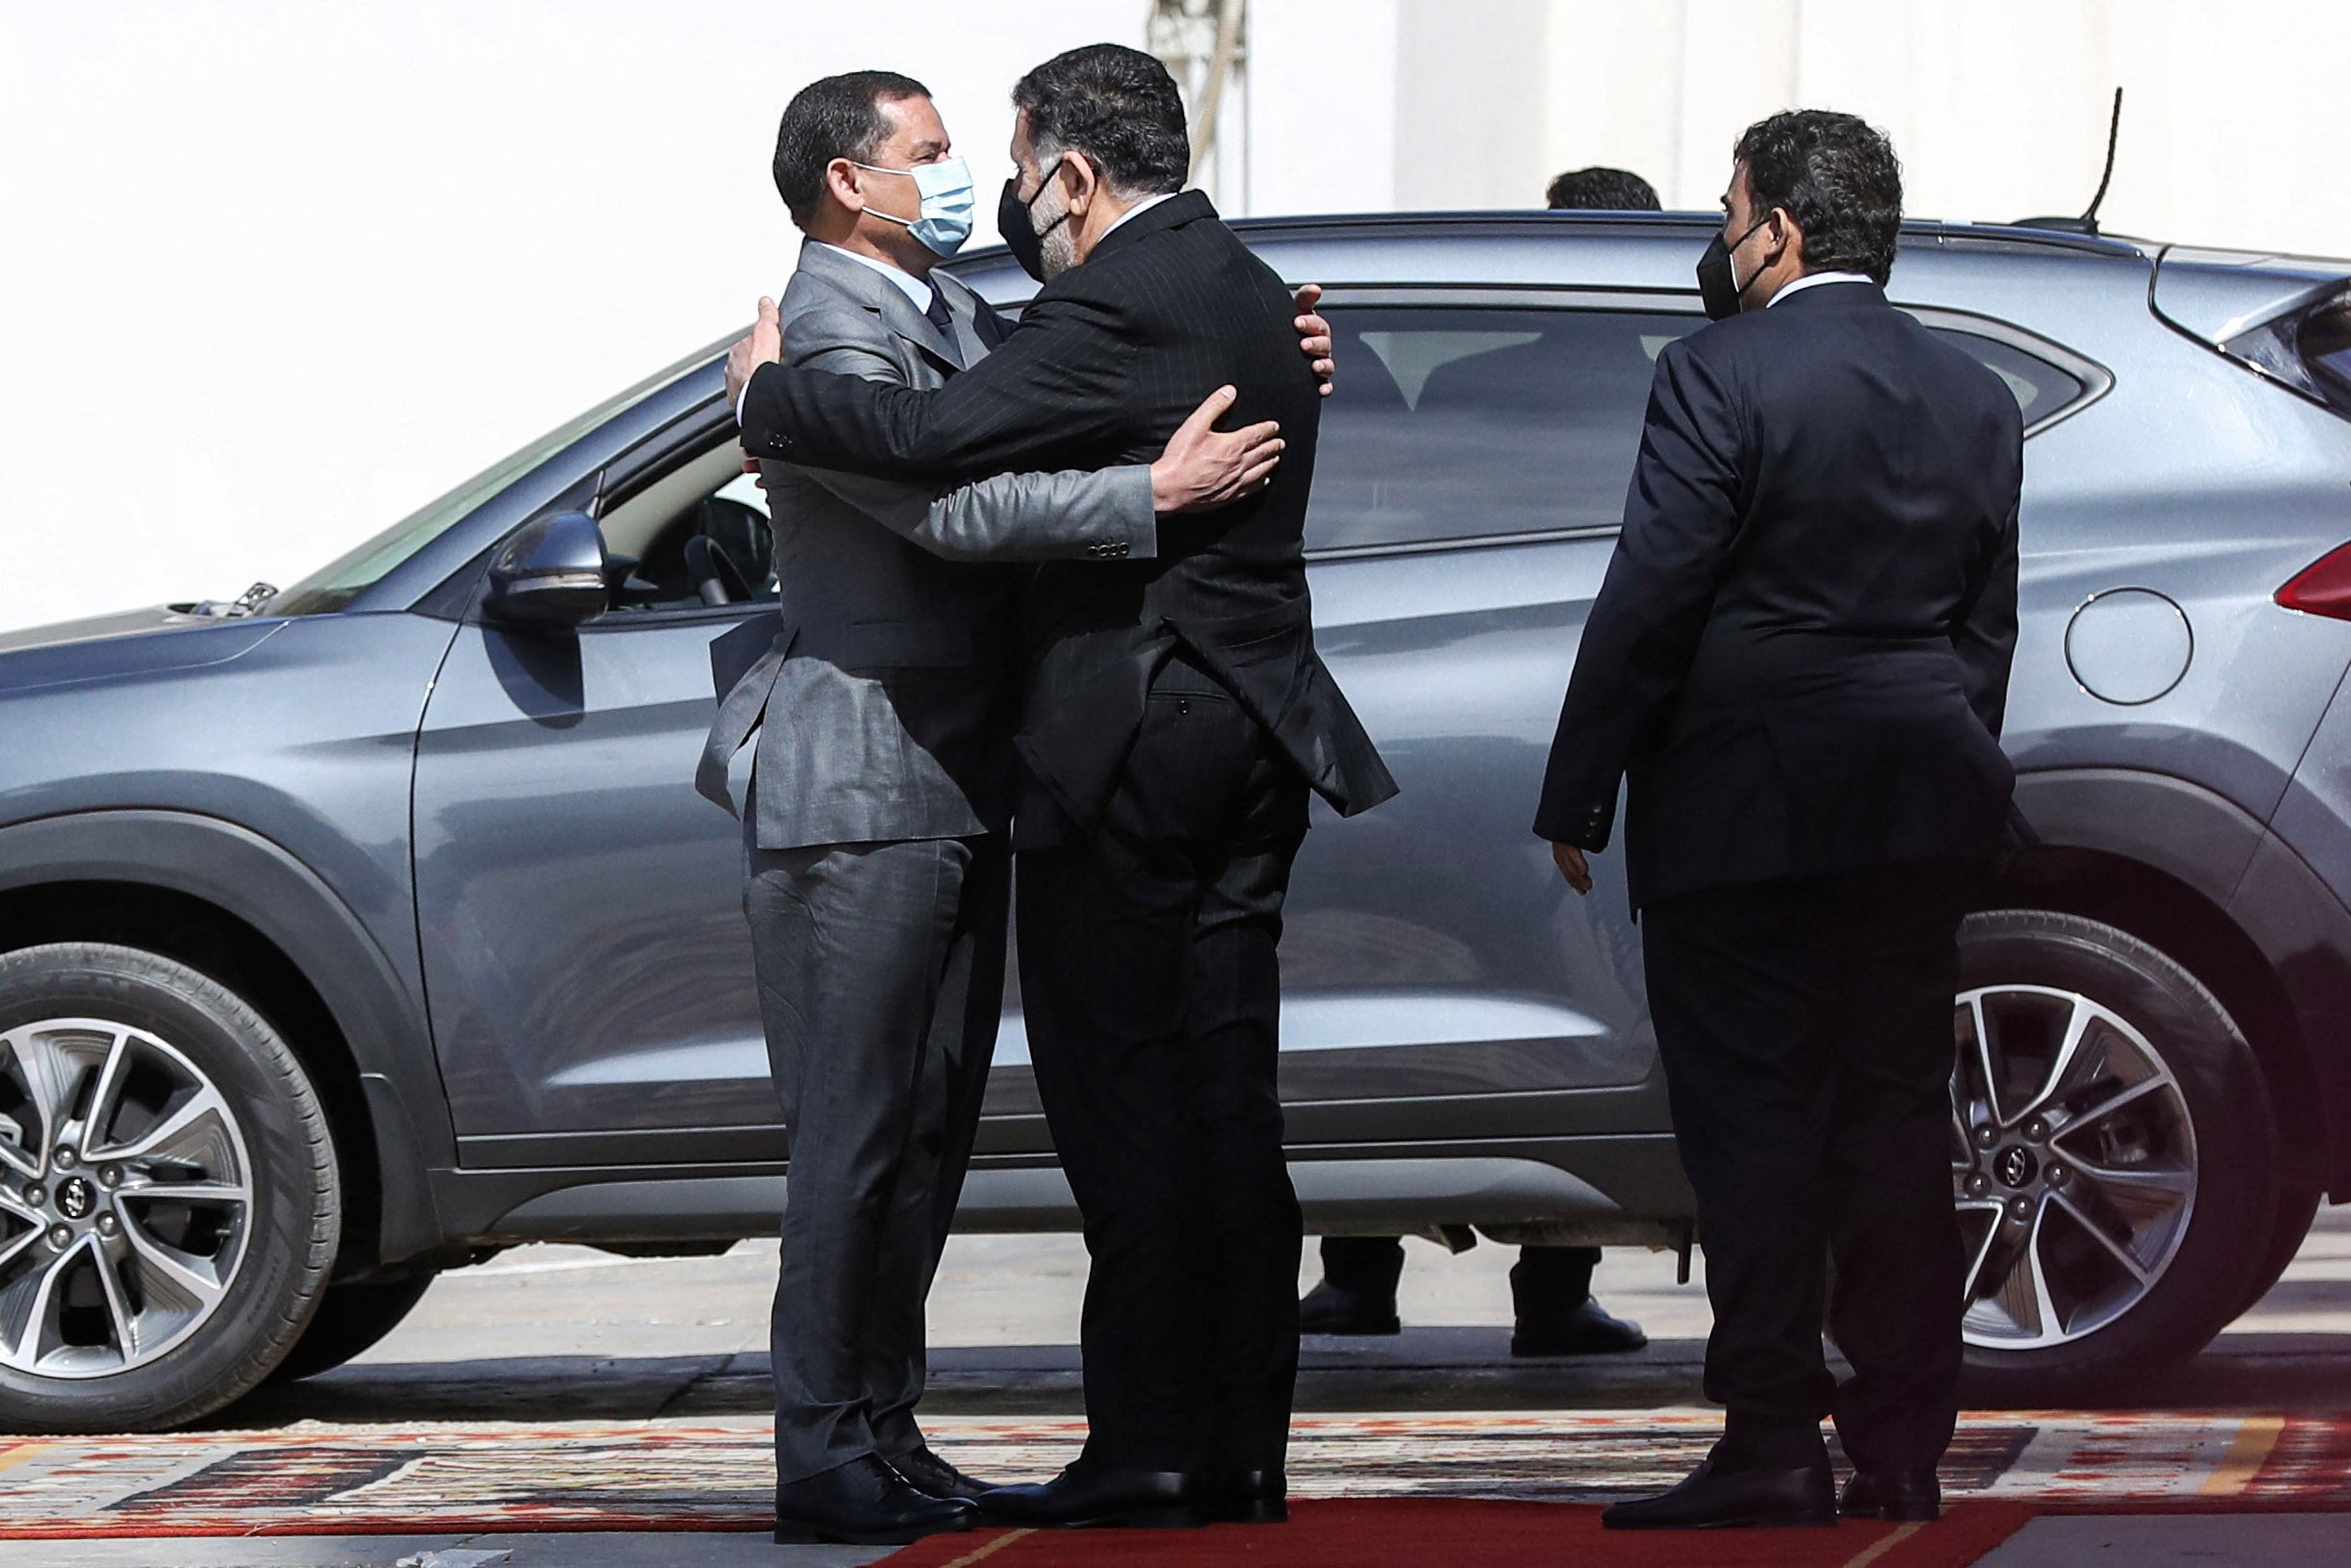 Mohamed al-Manfi, head of Libya's presidency council, looks on as interim prime minister Abdul Hamid Dbeibah embraces outgoing GNA head Fayez Serraj during the formal handover in Tripoli